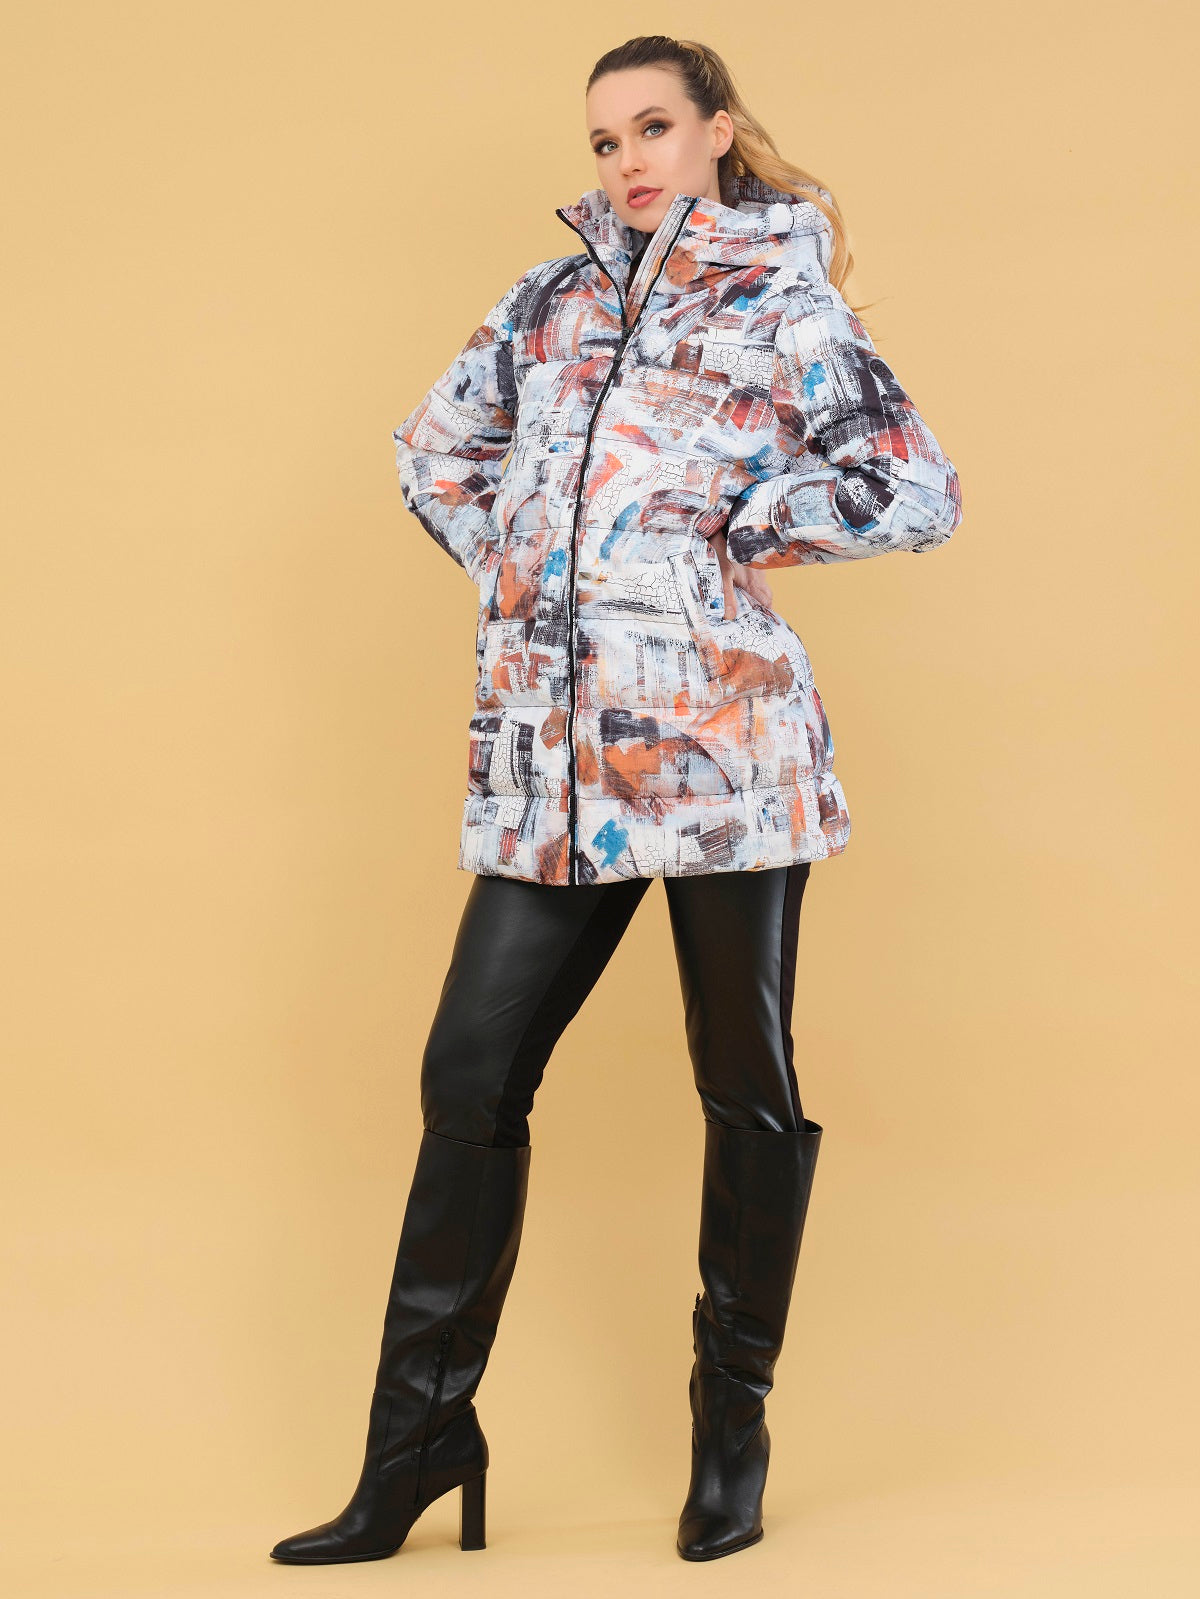 Abstract Print Puffer Coat 73840